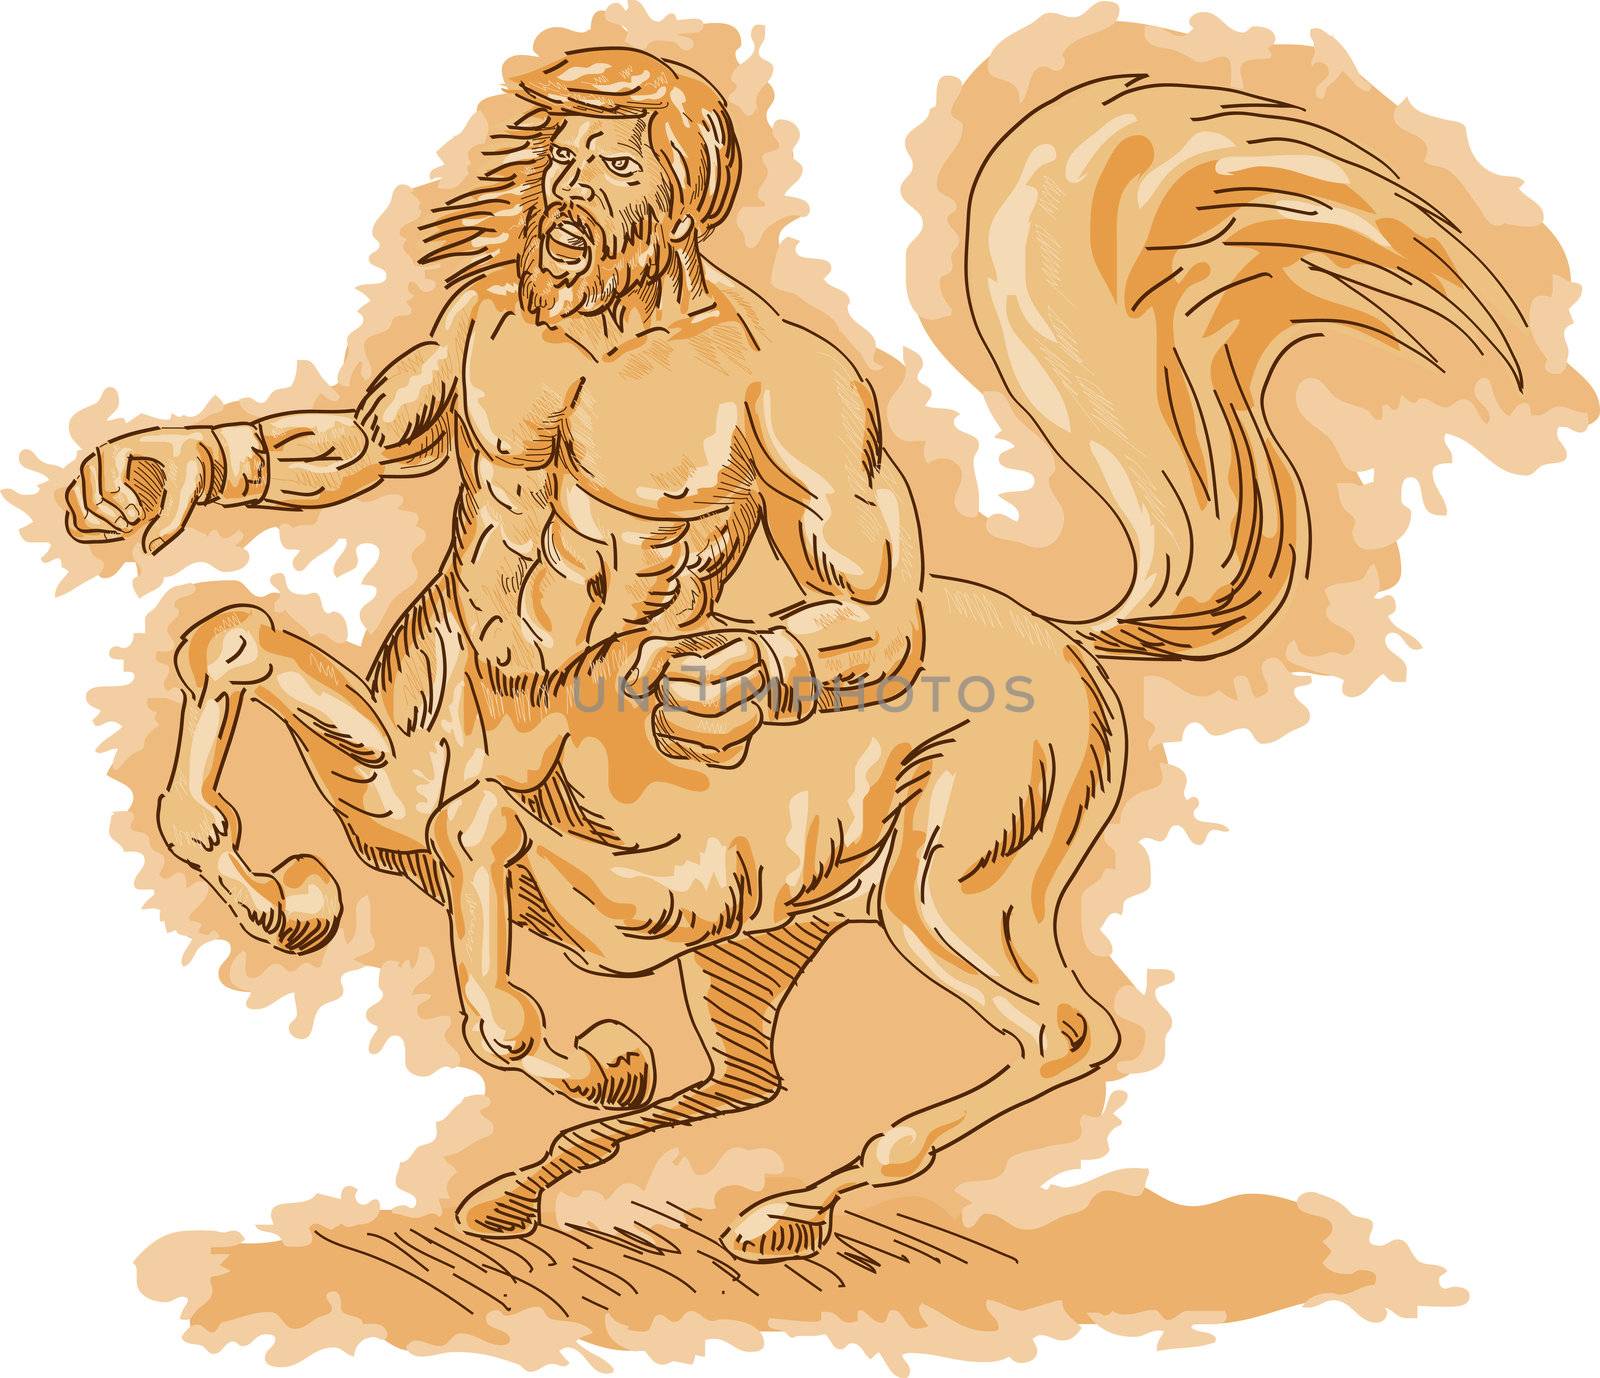 Illustration of a Centaur angry and rearing up